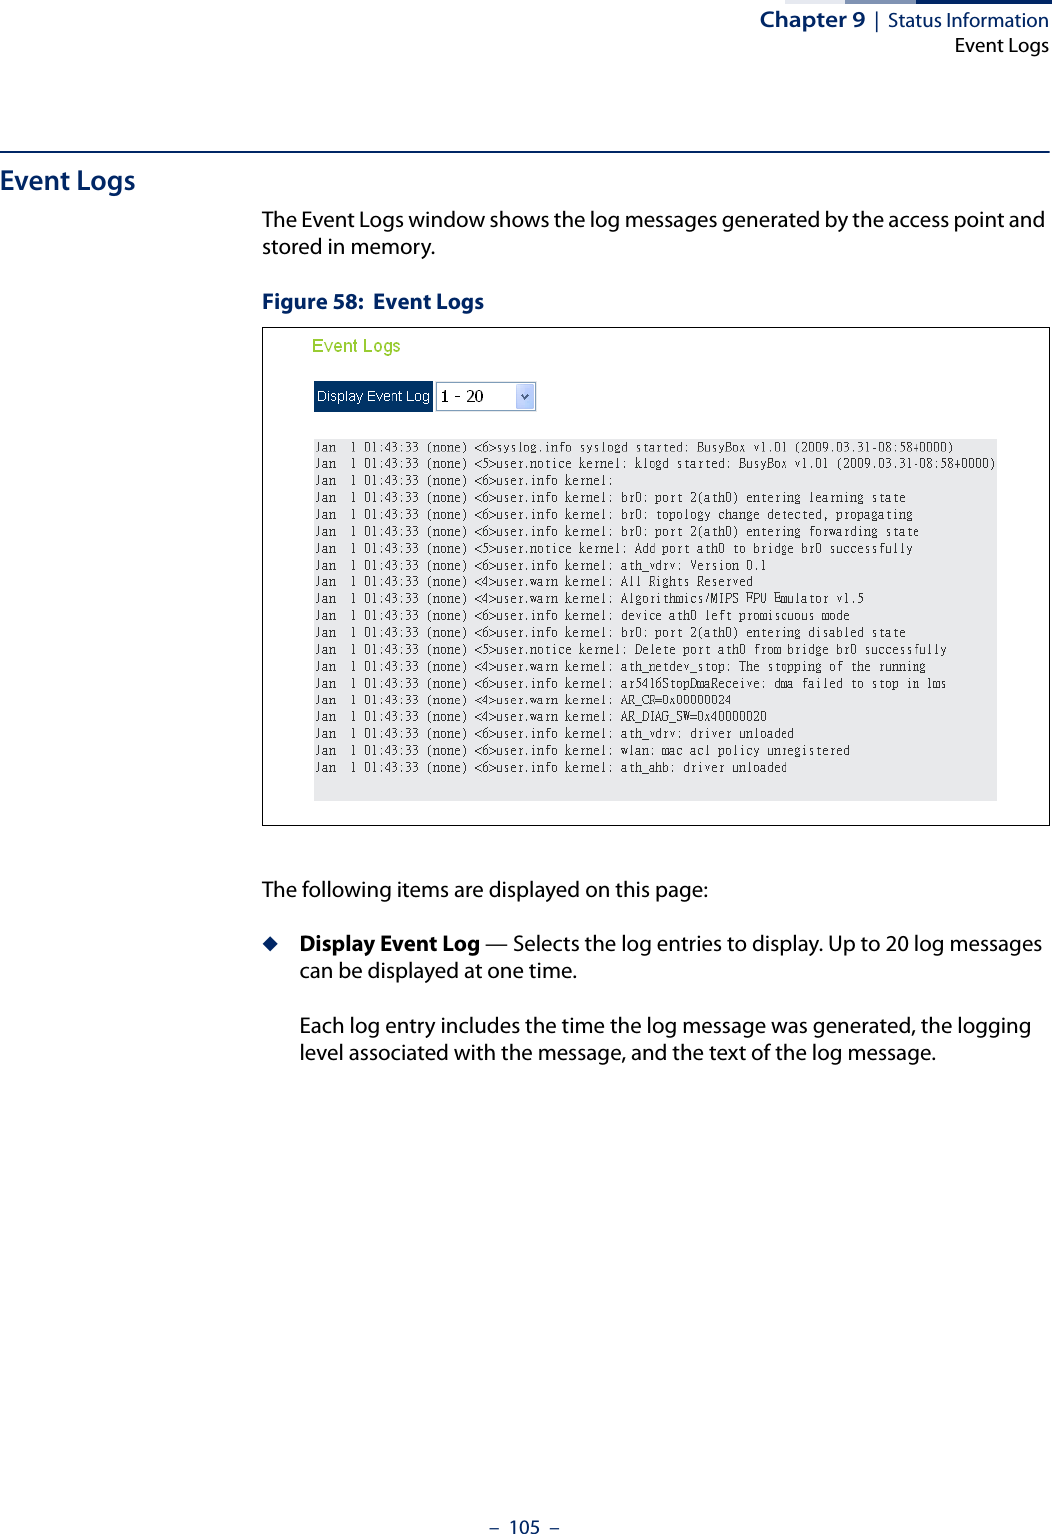 Chapter 9  |  Status InformationEvent Logs–  105  –Event LogsThe Event Logs window shows the log messages generated by the access point and stored in memory.Figure 58:  Event LogsThe following items are displayed on this page:◆Display Event Log — Selects the log entries to display. Up to 20 log messages can be displayed at one time.Each log entry includes the time the log message was generated, the logging level associated with the message, and the text of the log message.